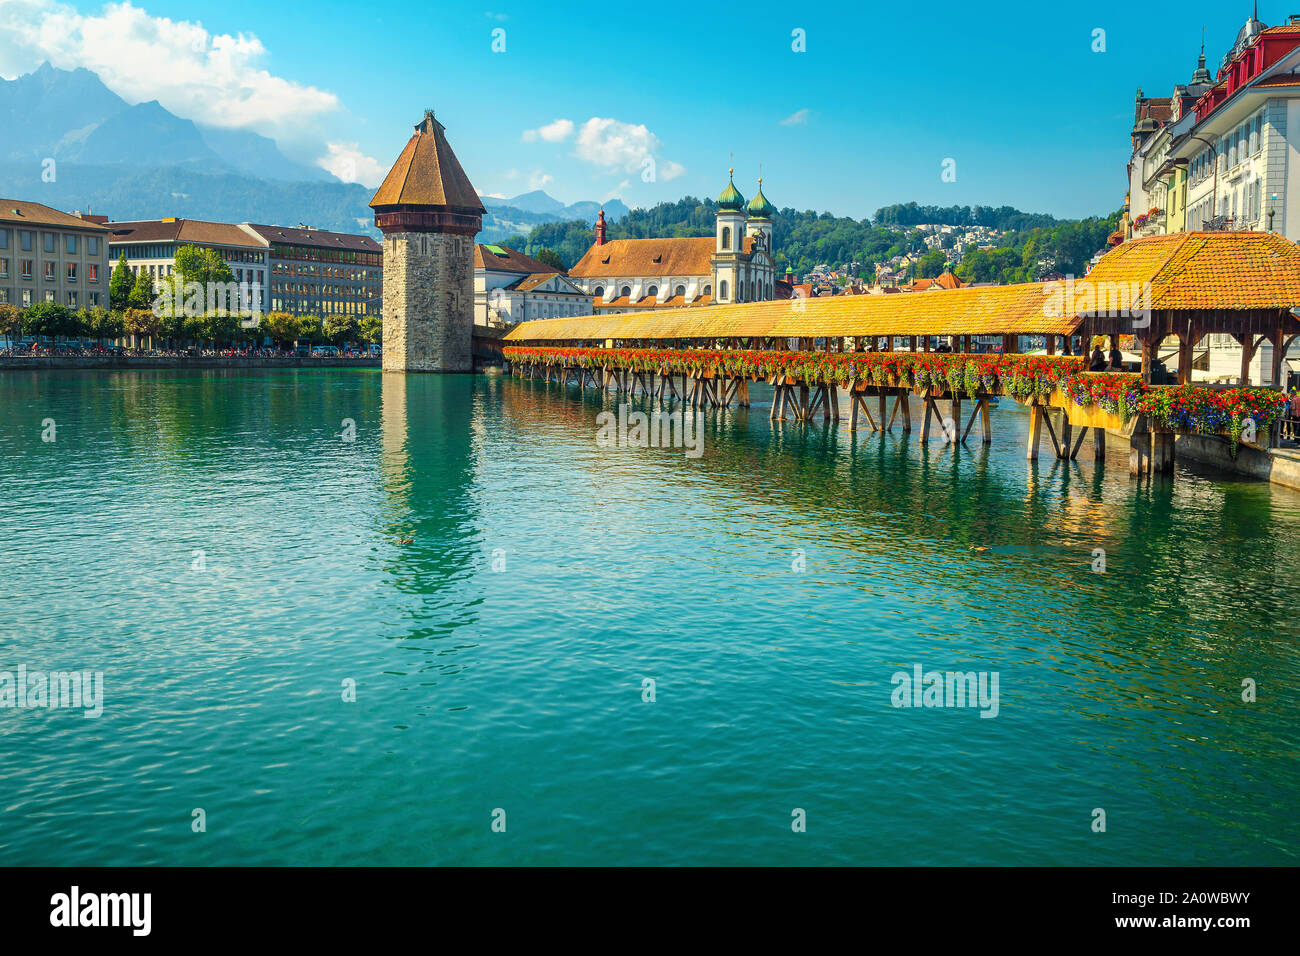 Spectacular touristic and travel destination in Lucerne. Famous Jesuitenkirche church with Reuss river. Fantastic cityscape view with flowered wooden Stock Photo